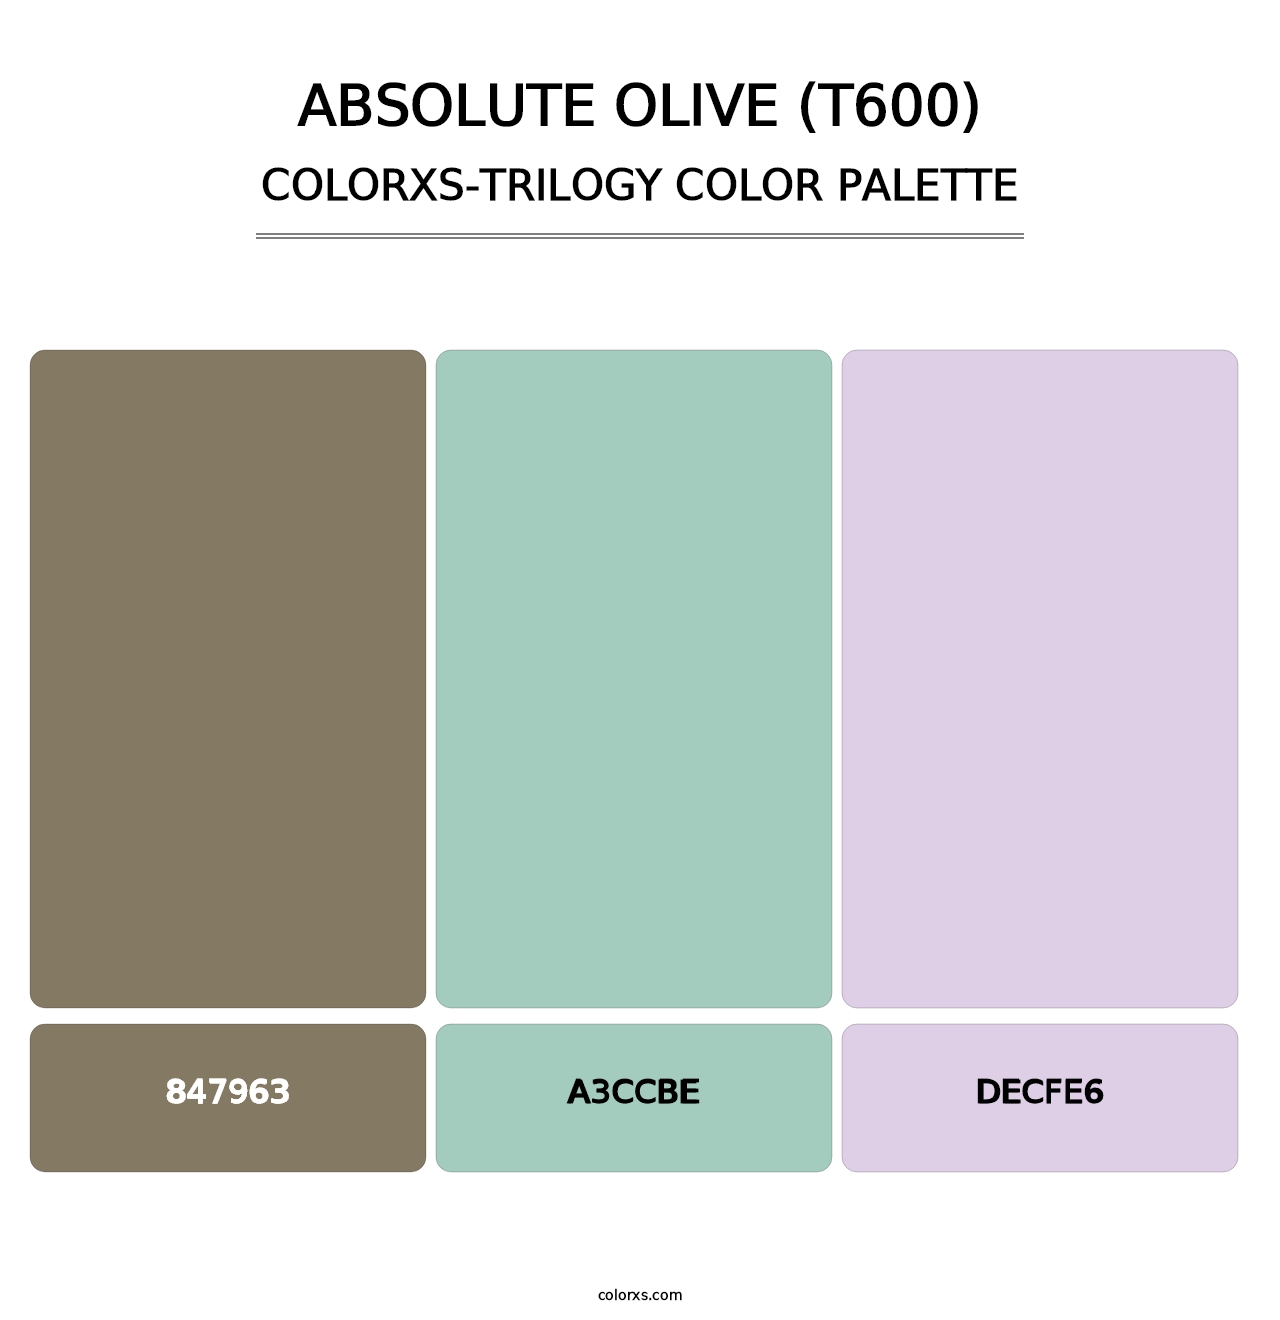 Absolute Olive (T600) - Colorxs Trilogy Palette